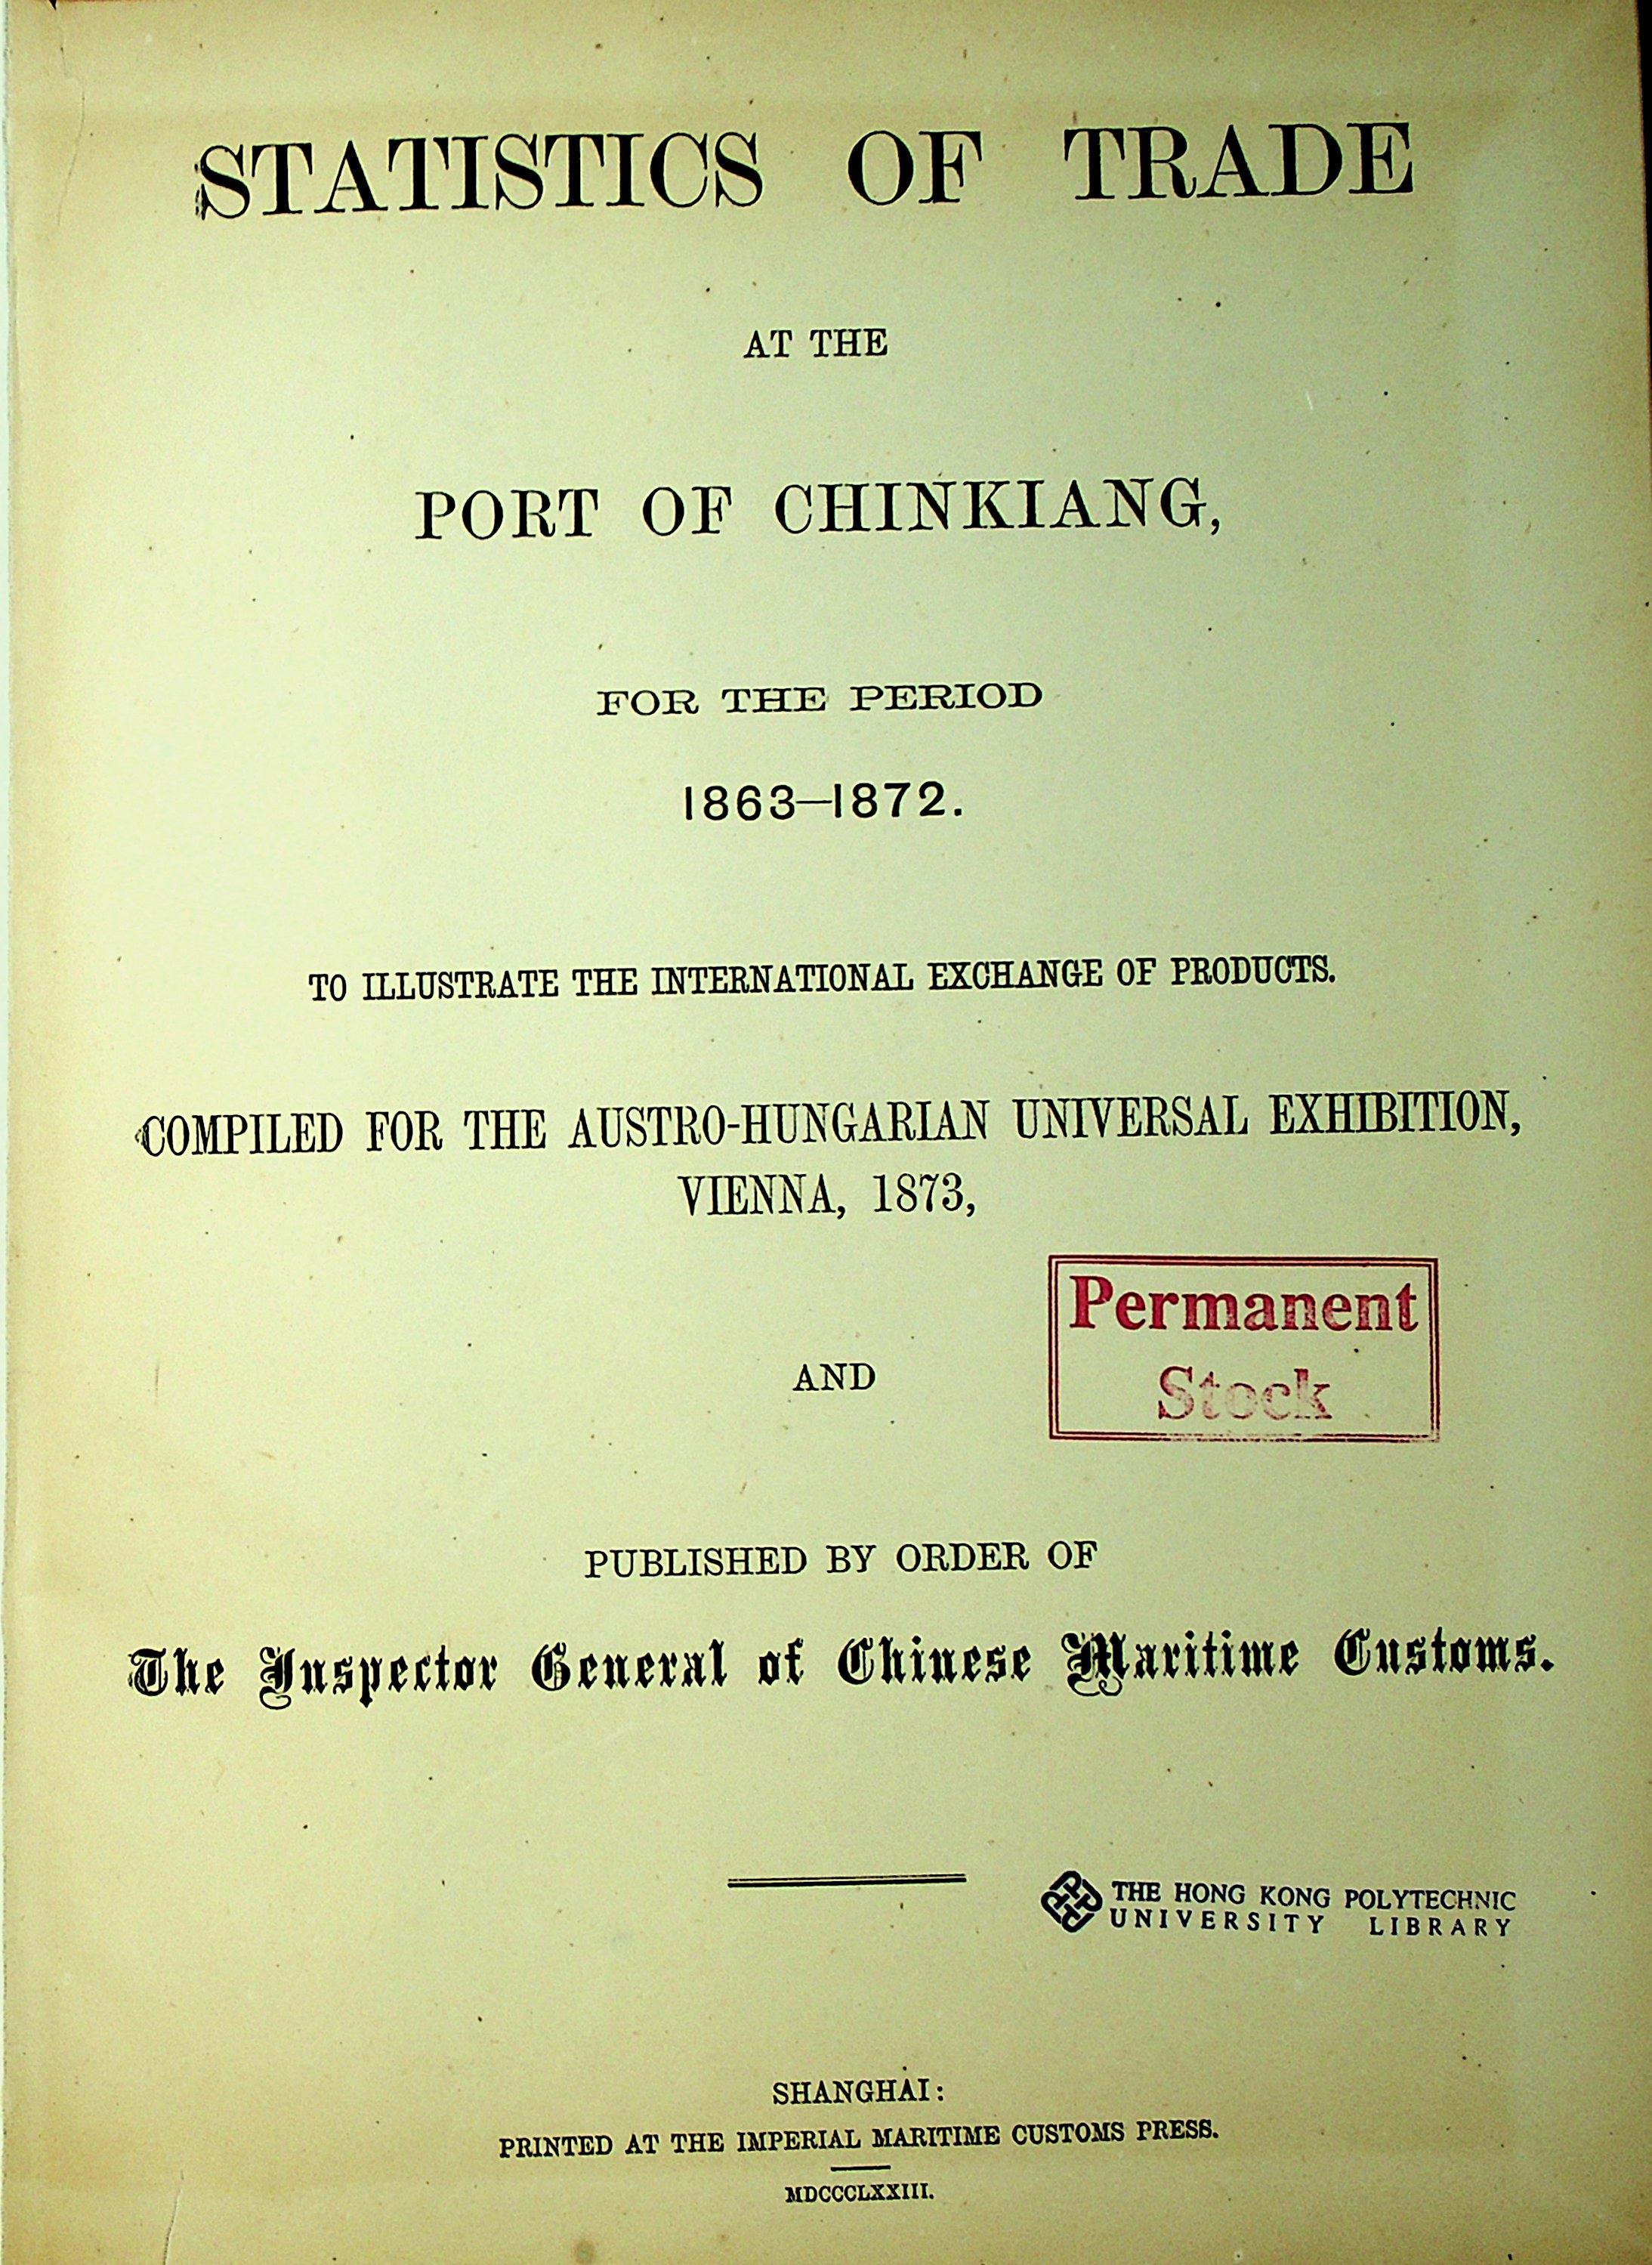 Statistics of trade at the port of Chinkiang, for the period 1863-1872